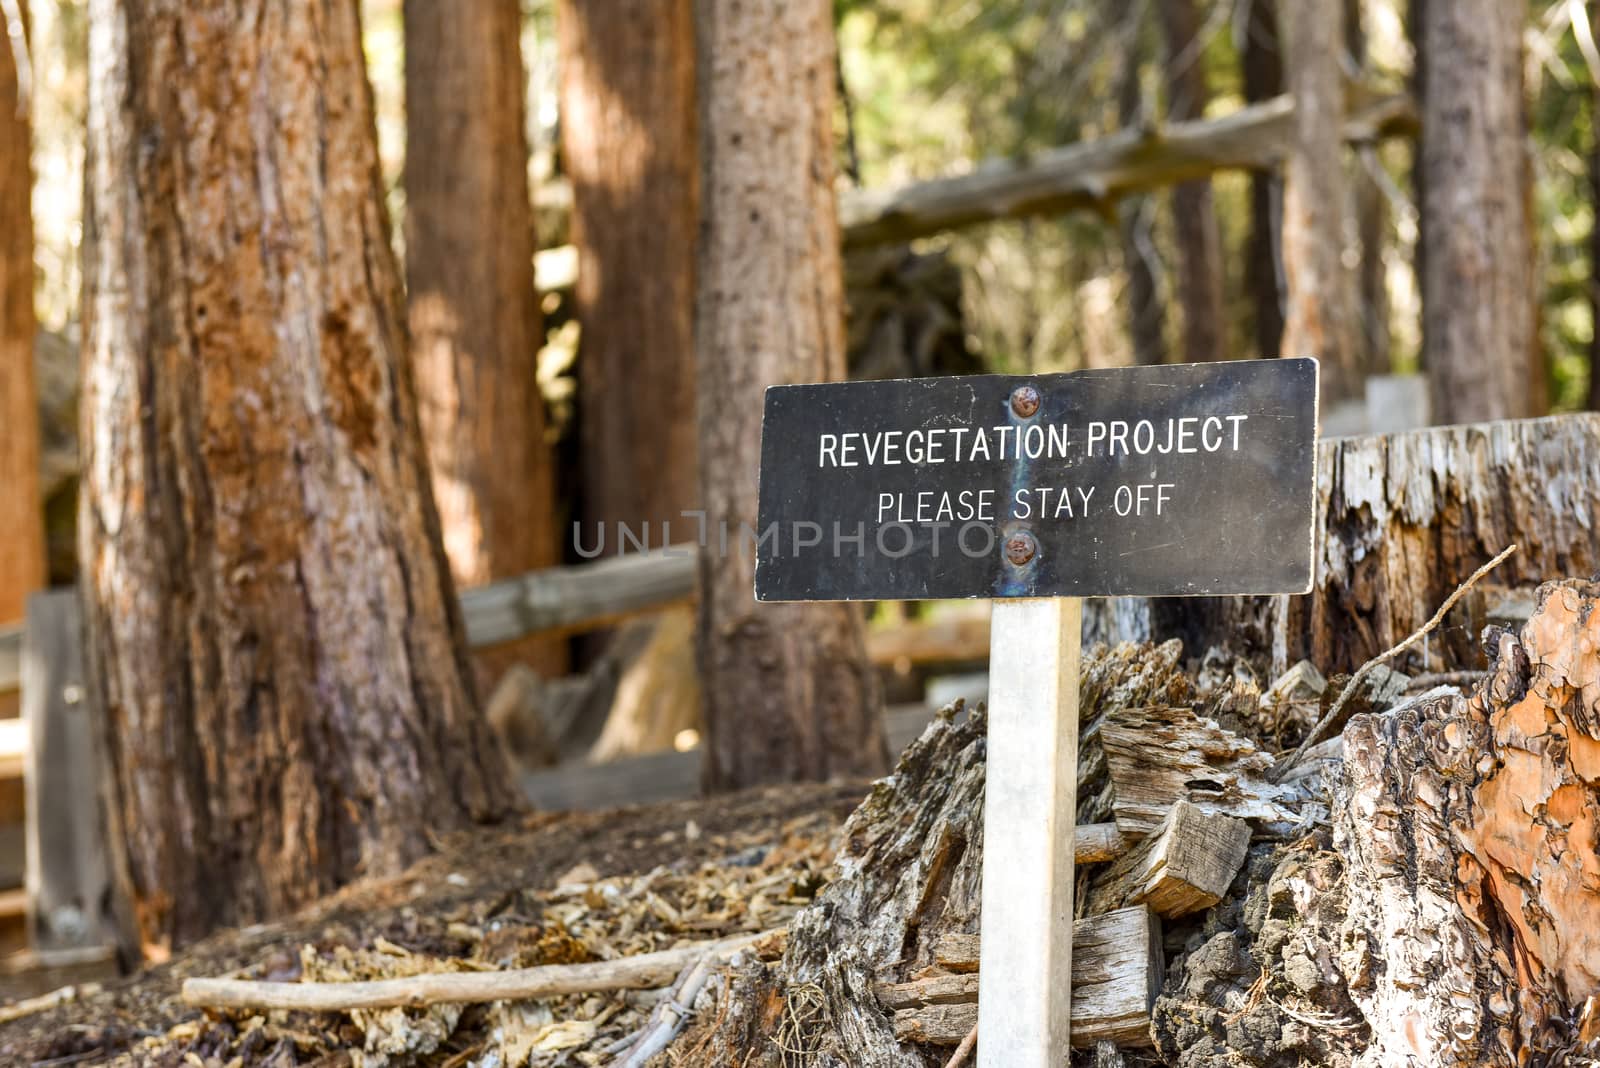 Revegetation Project sign in Sequoia National Park, California by Njean